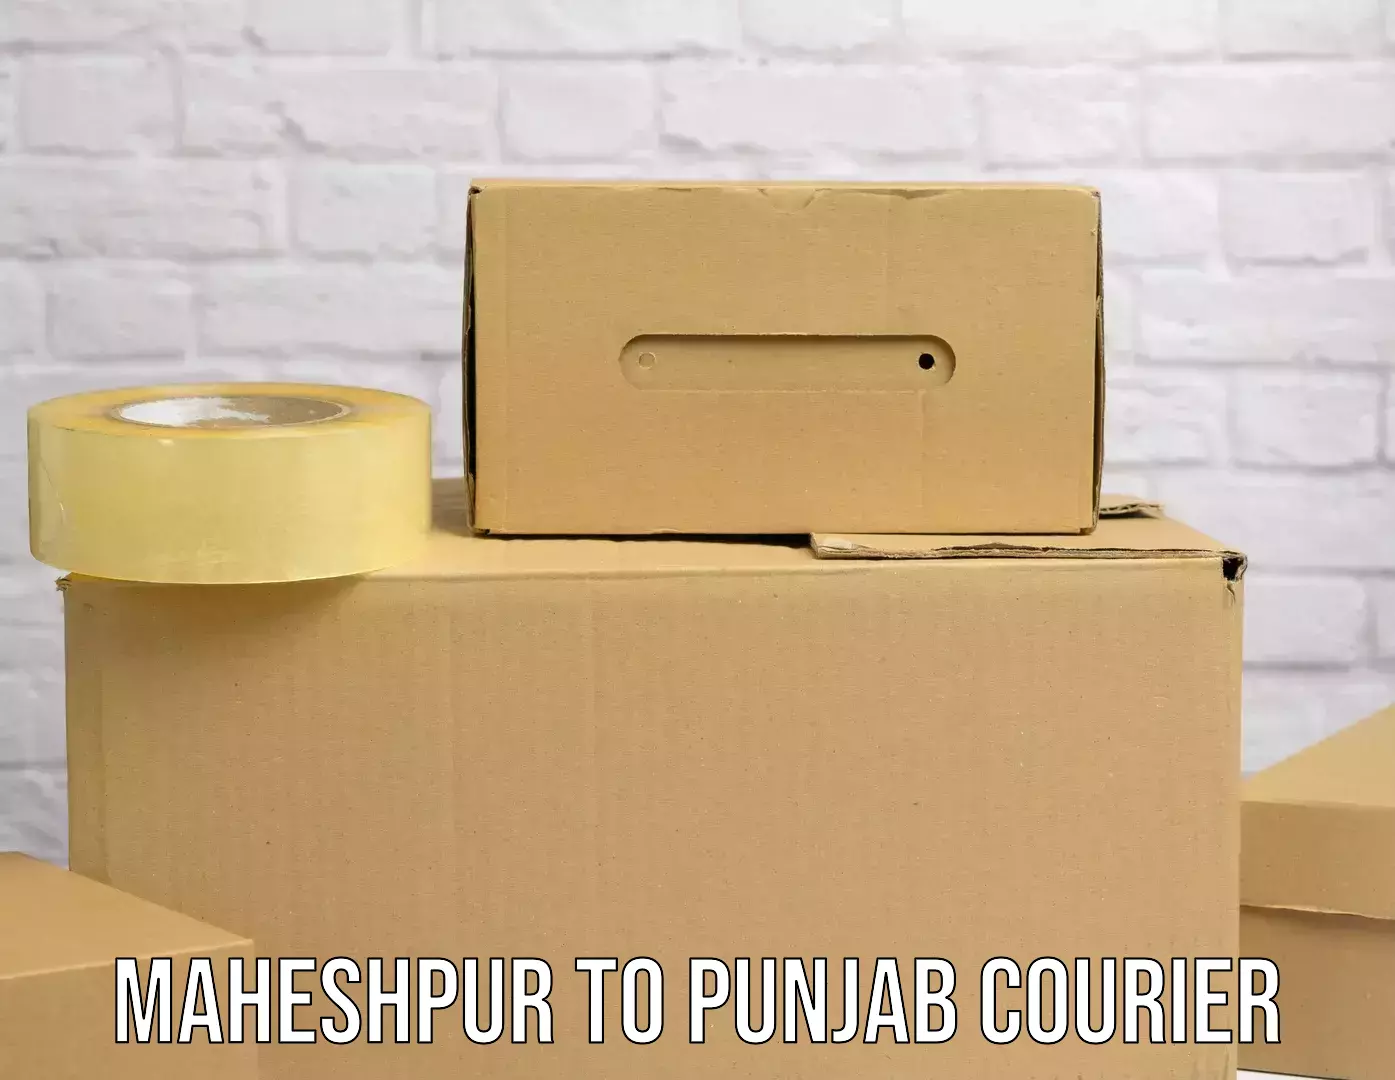 Sustainable delivery practices Maheshpur to Punjab